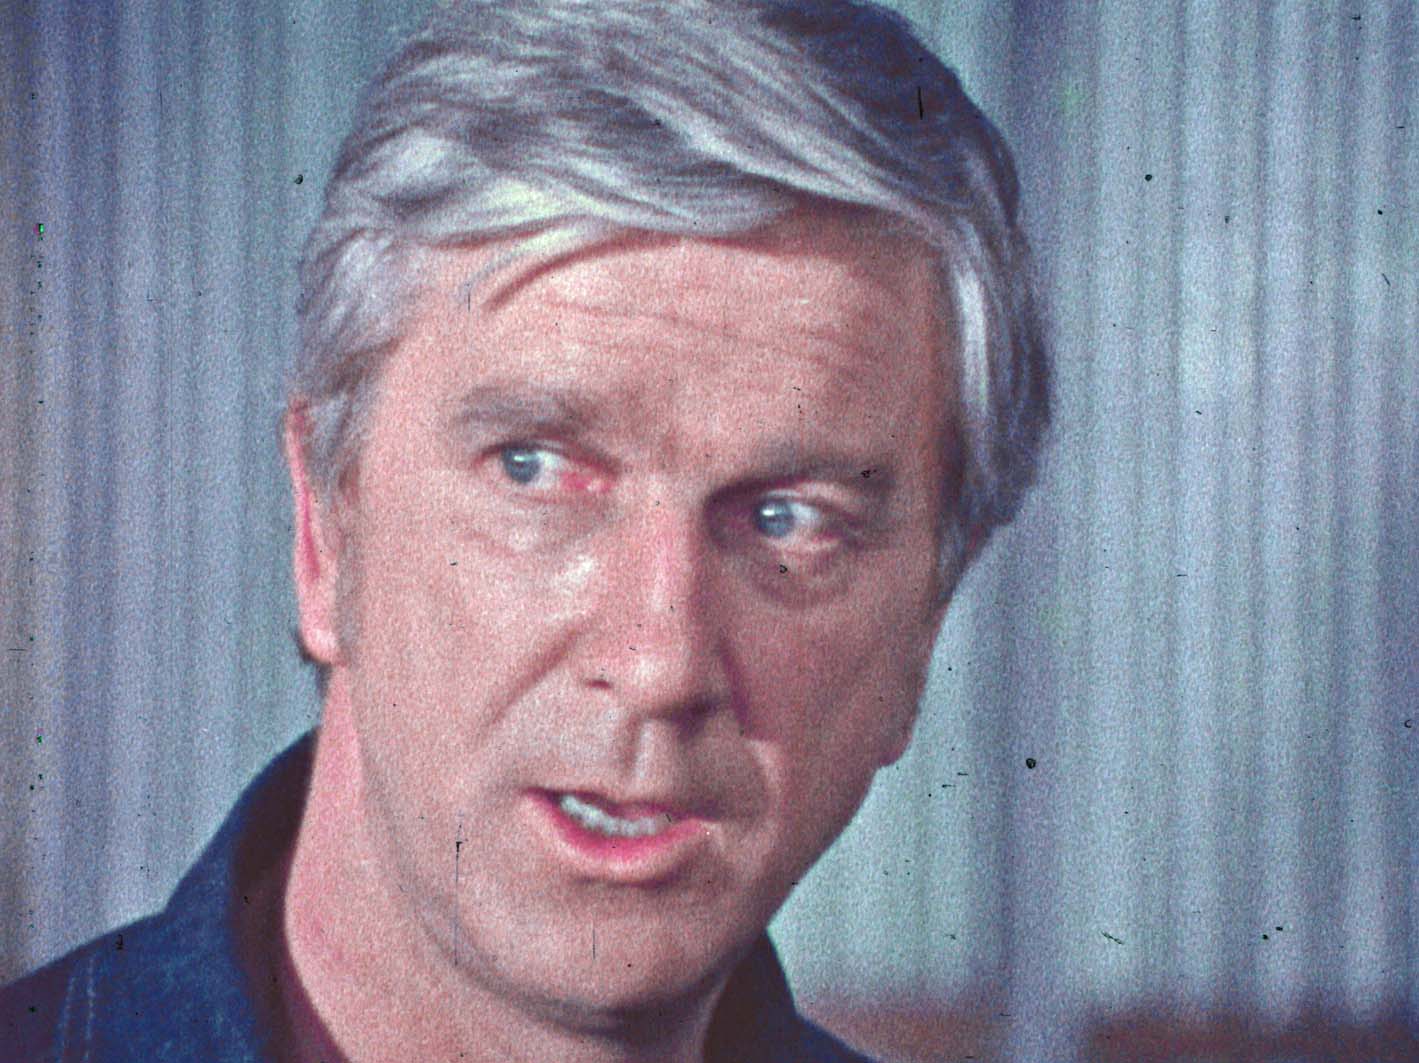 A close-up of Leslie Nielsen, looking away from the camera